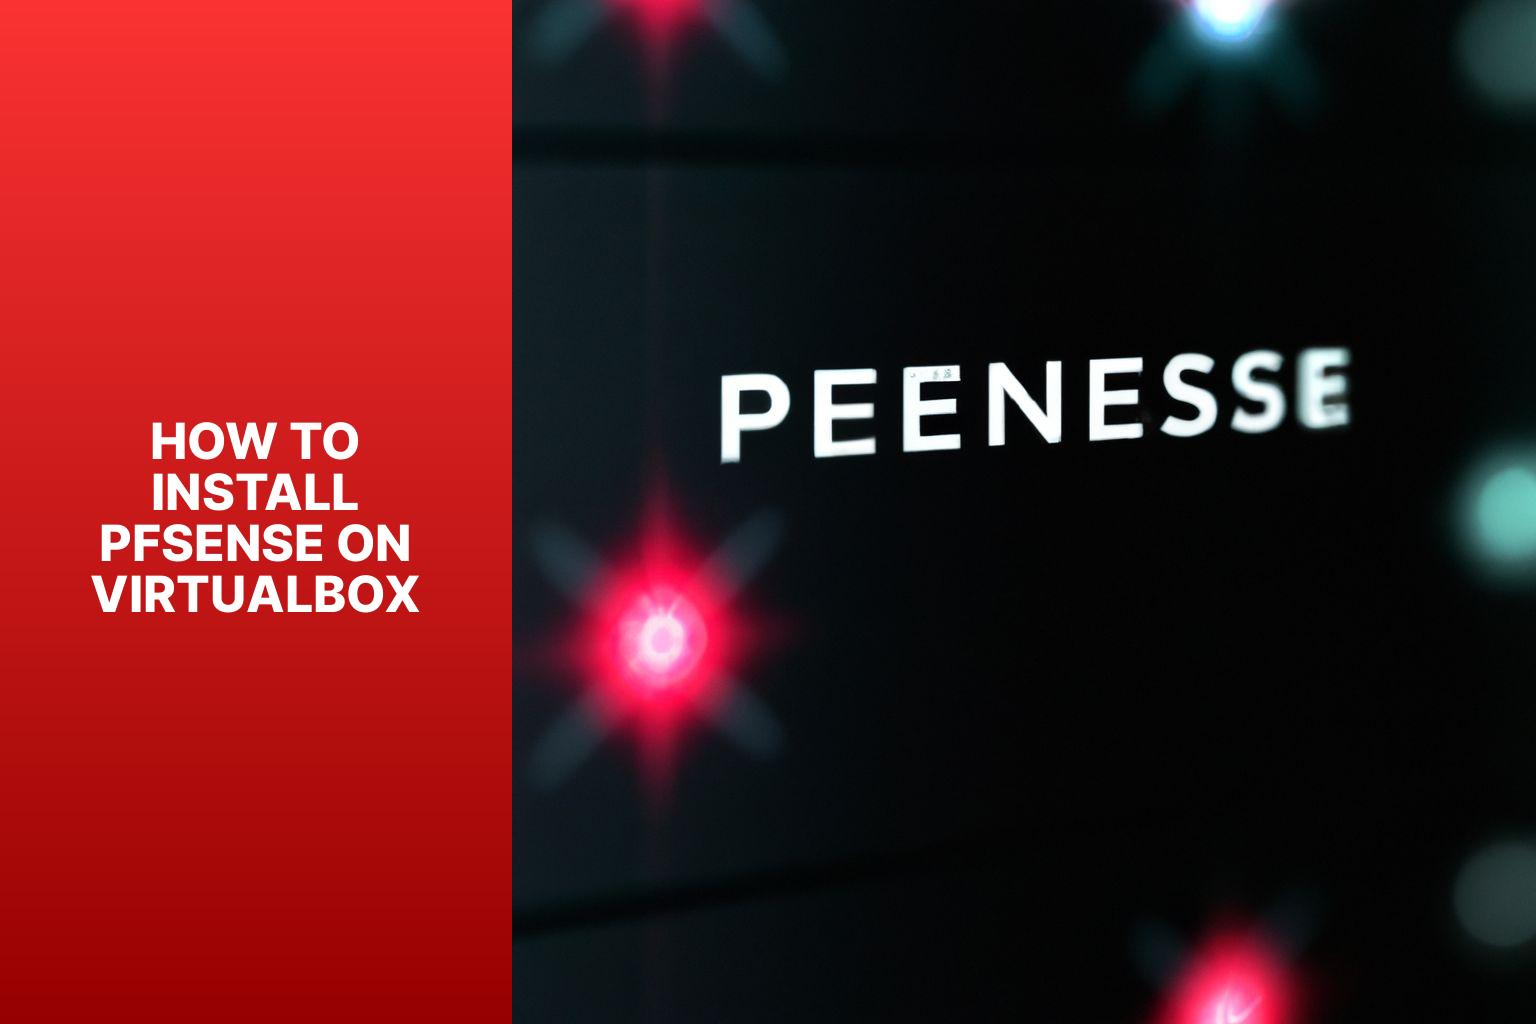 Step-by-Step Guide: Installing pfSense on VirtualBox for Seamless Network Security